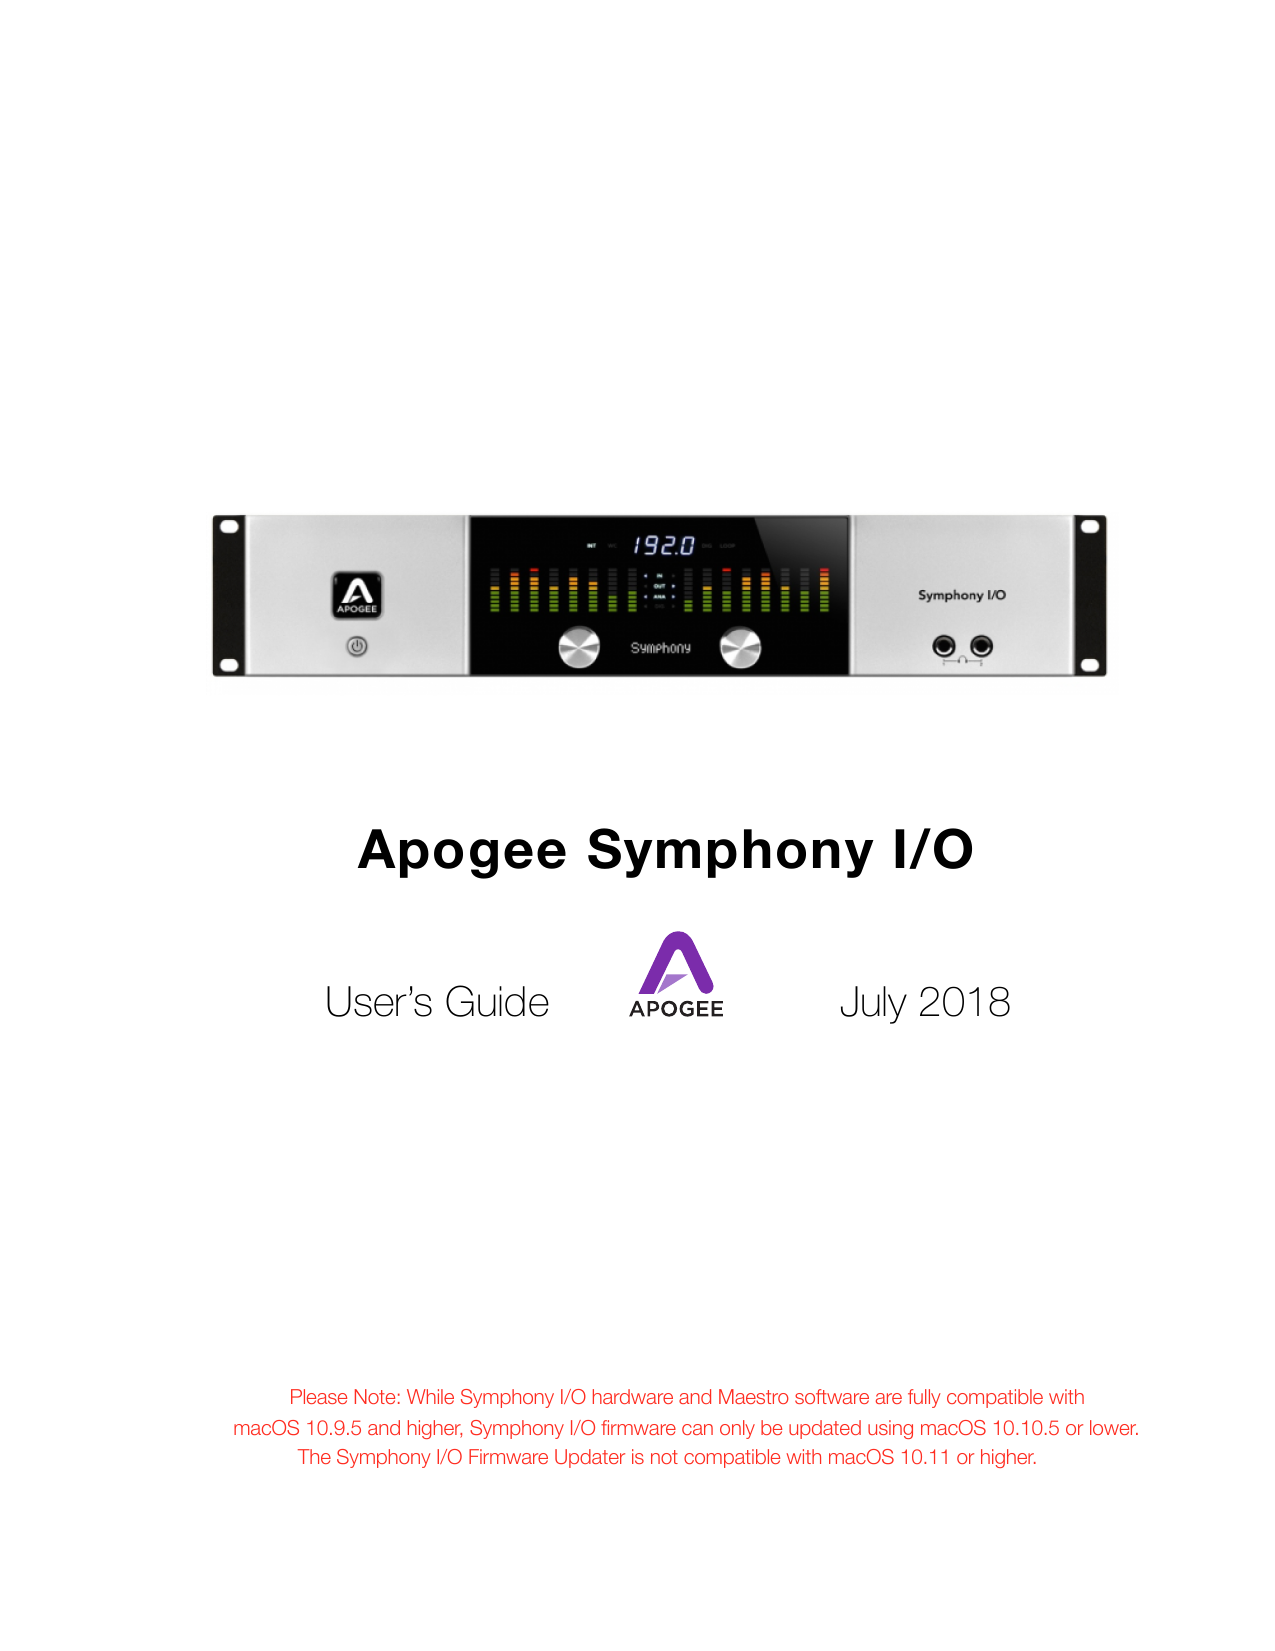 is anyone using the apogee one for mac yet 2018